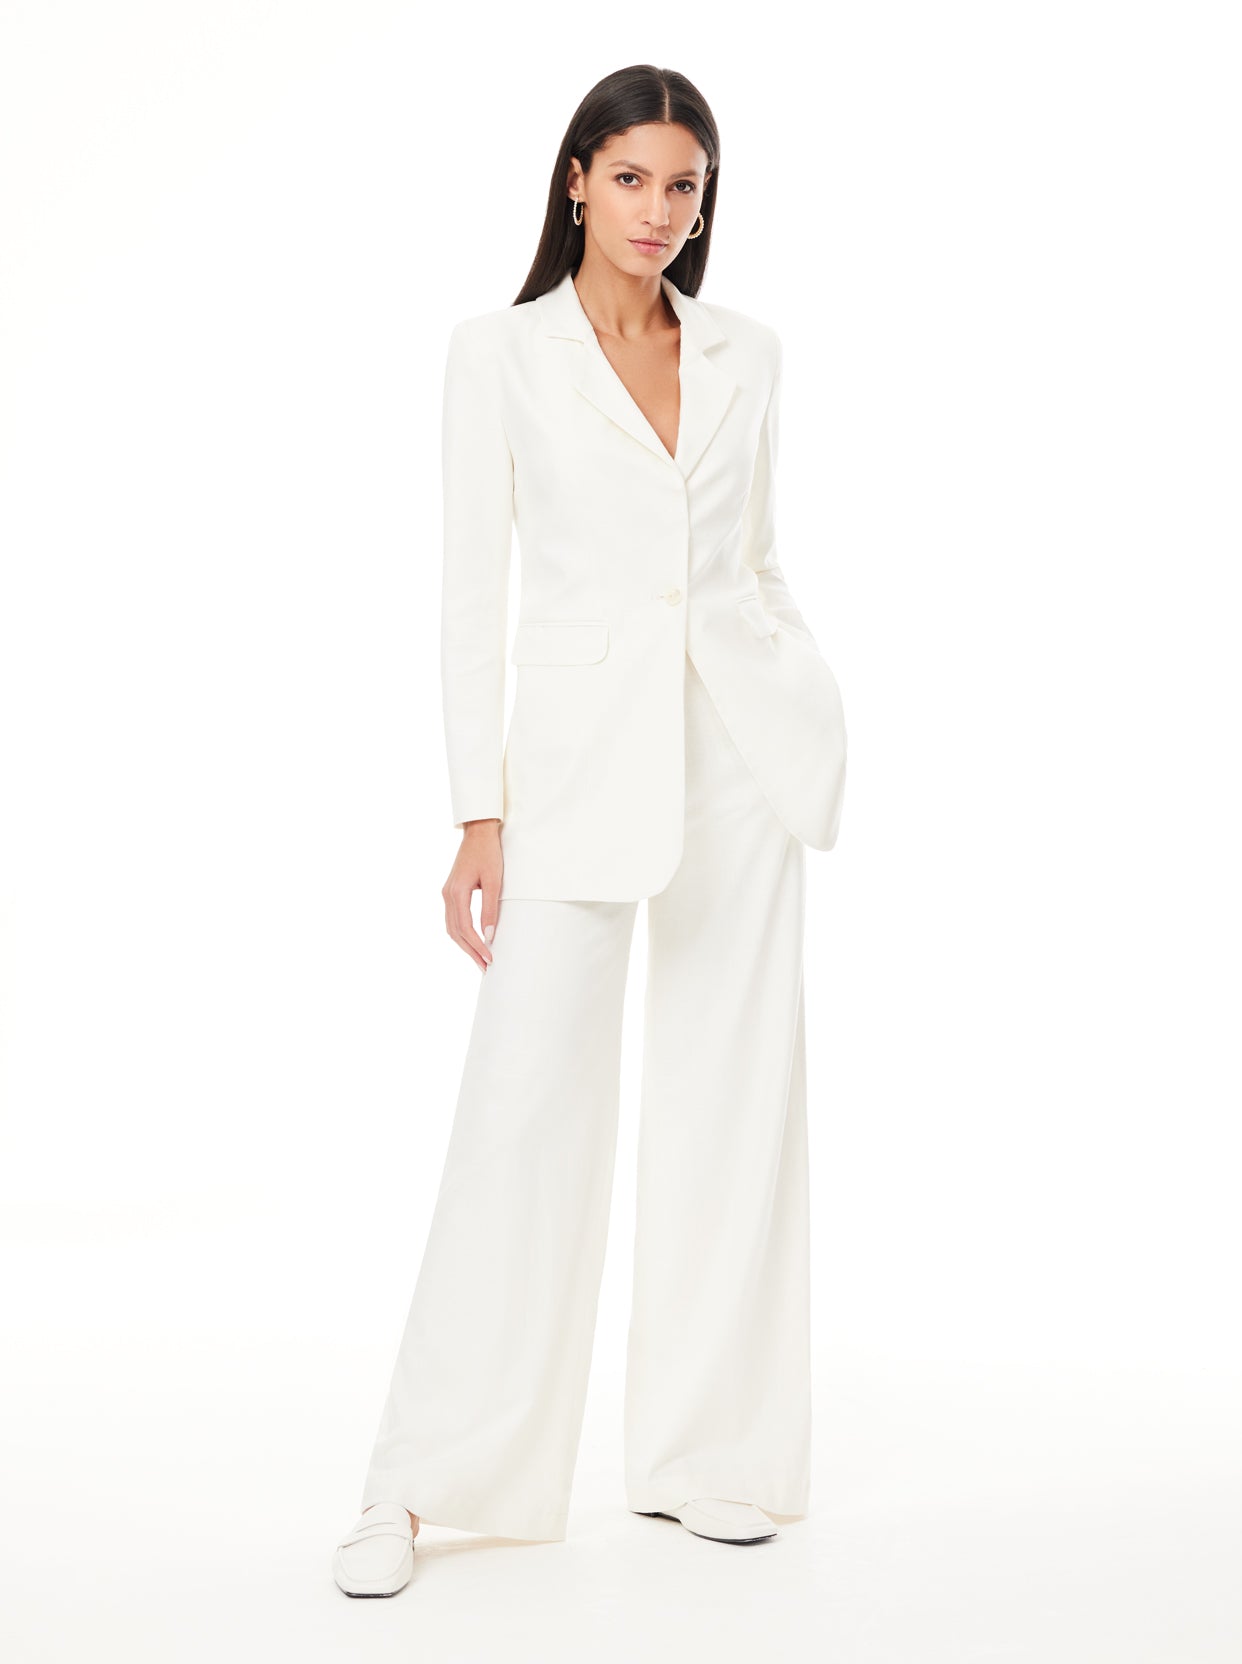 Divas Fashion Trouser Suit in White Embroidered Fabric LSTV112484